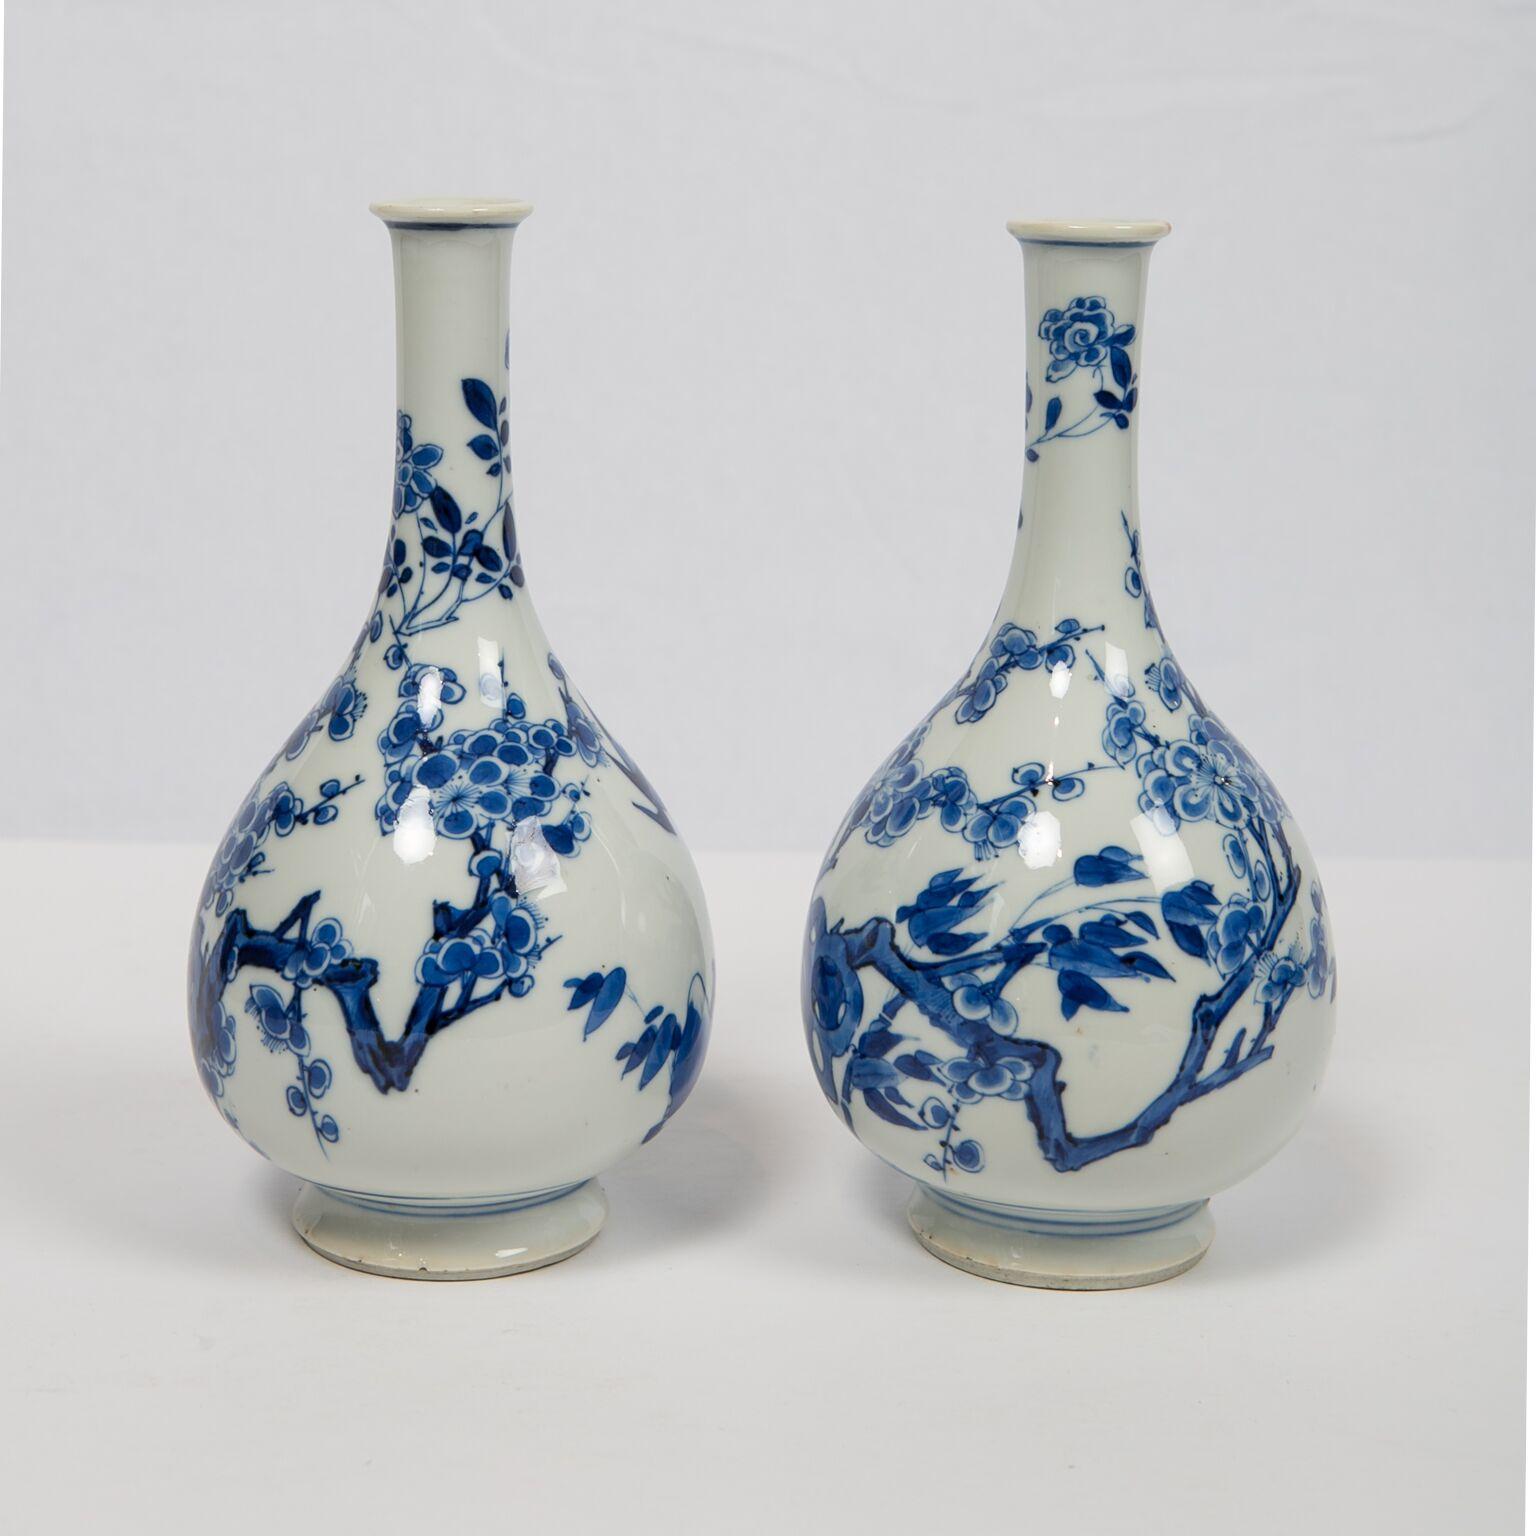 Hand-Painted Pair of Antique Blue and White Chinese Porcelain Vases Kangxi, Mid 17th Century